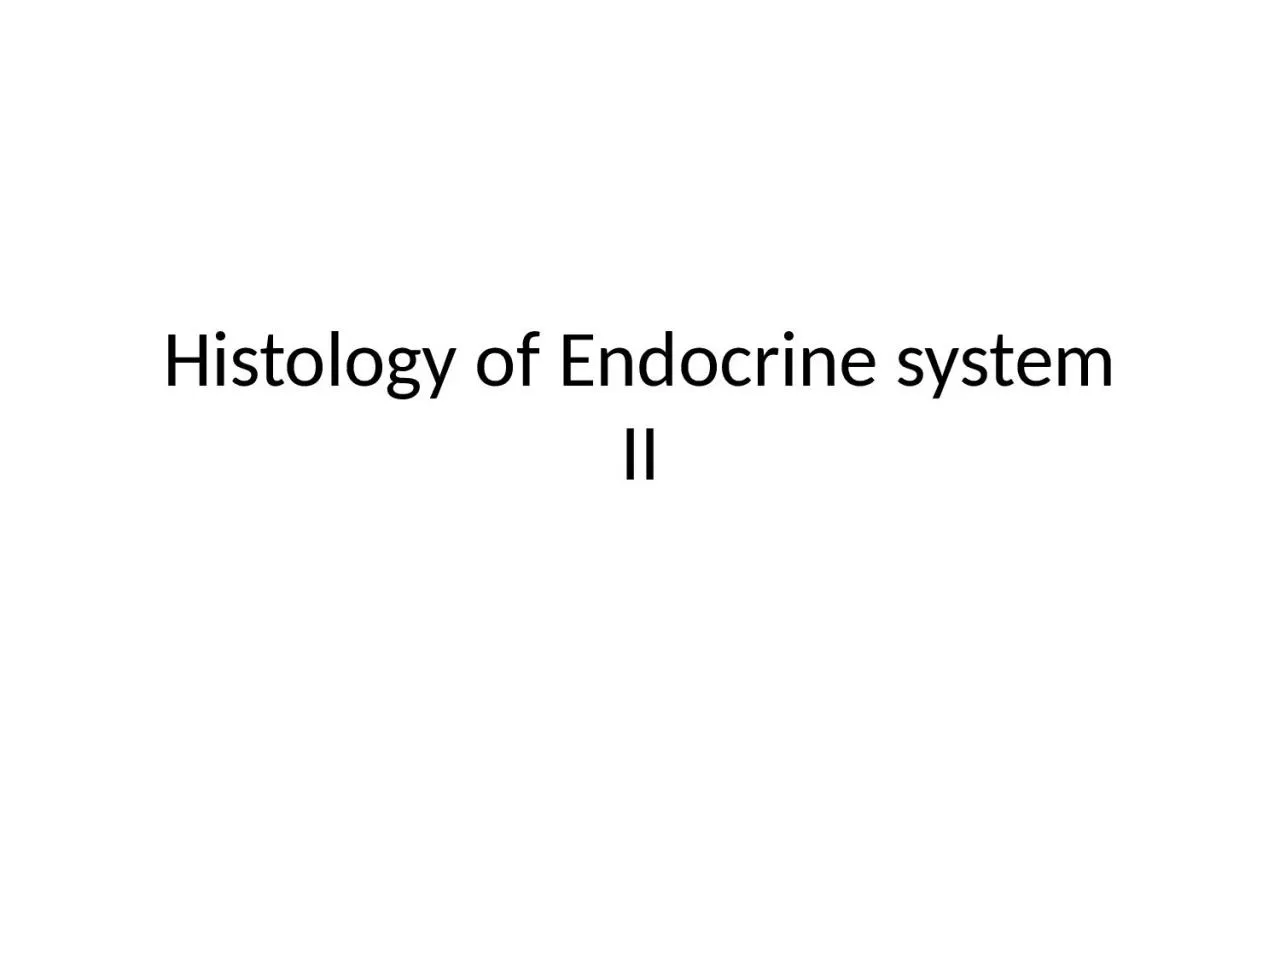 Histology of Endocrine system